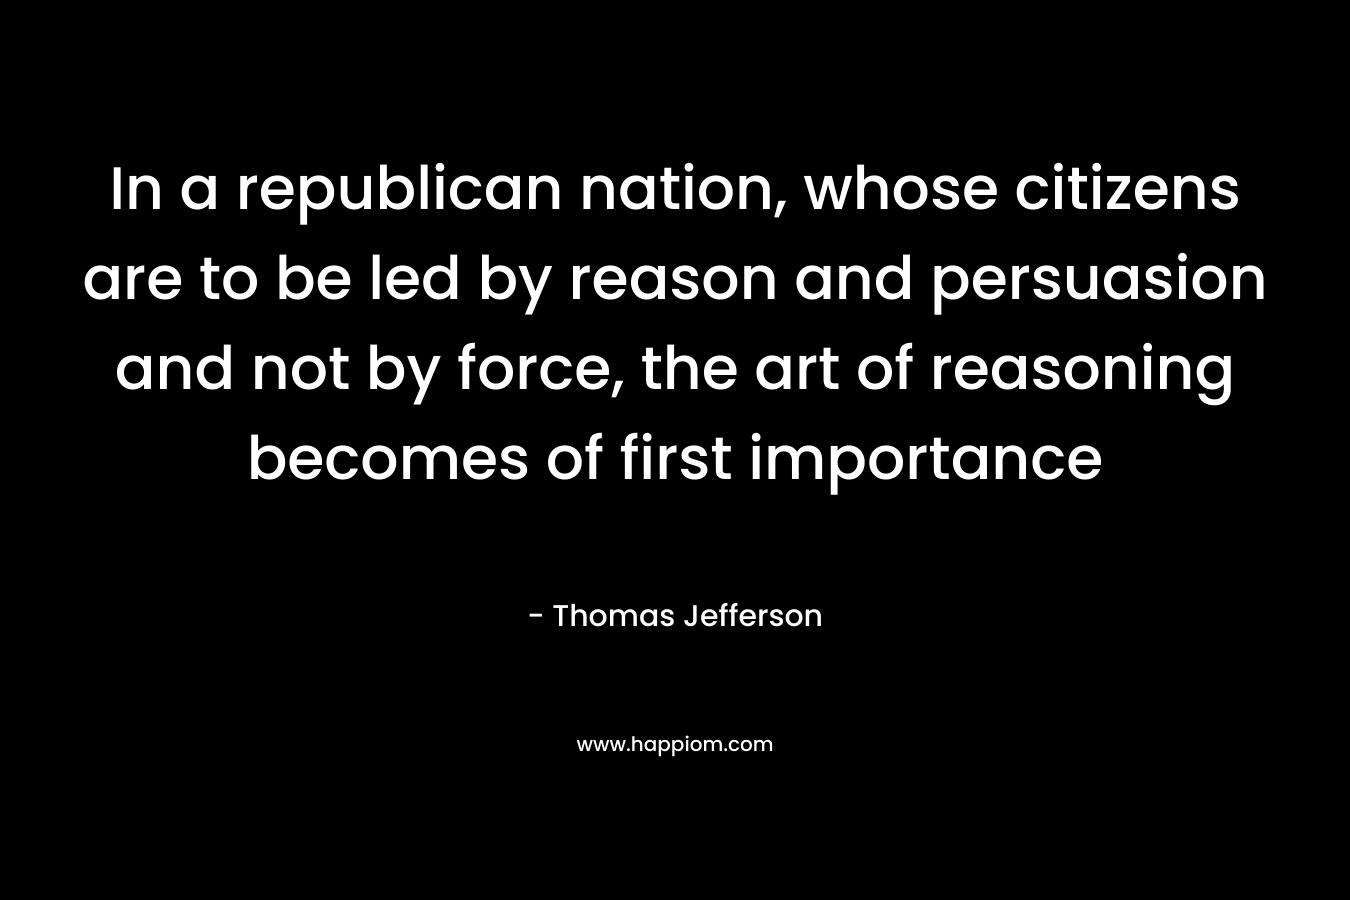 In a republican nation, whose citizens are to be led by reason and persuasion and not by force, the art of reasoning becomes of first importance – Thomas Jefferson